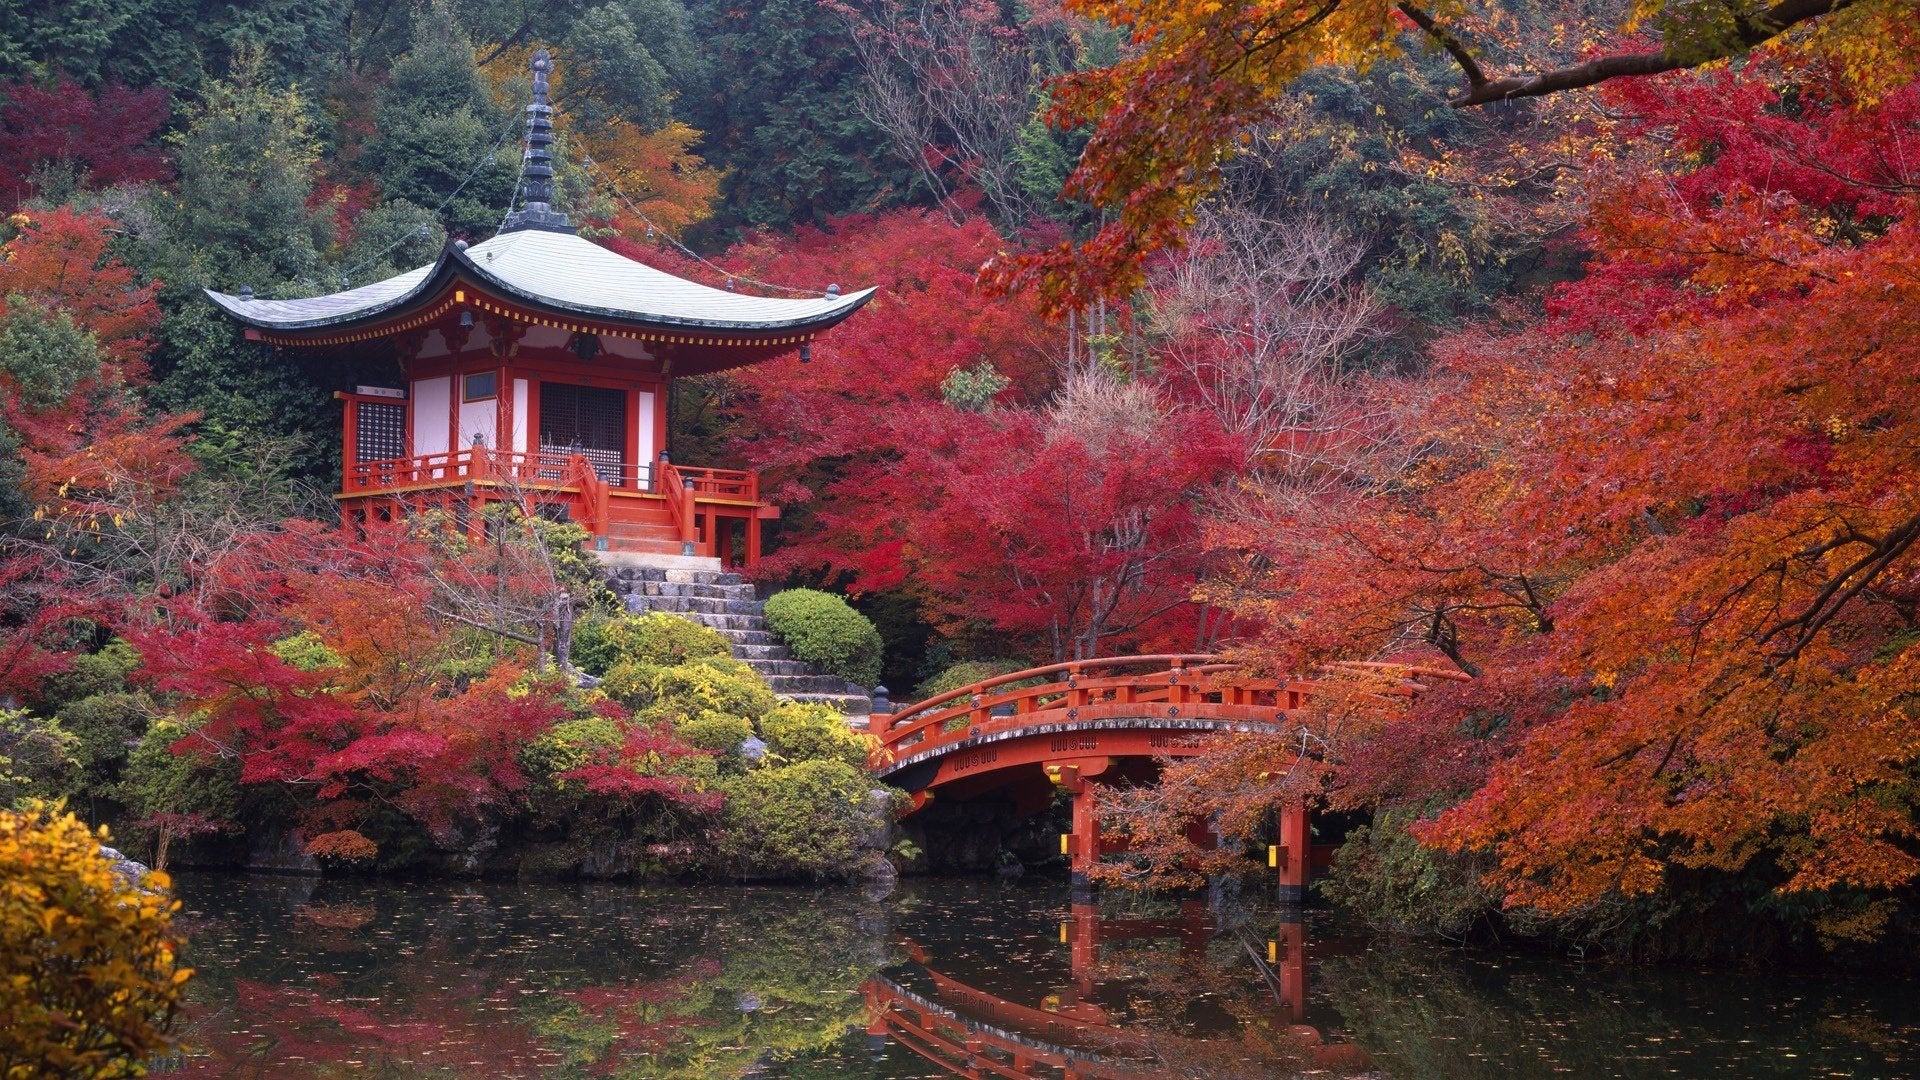 Kyoto Is So Beautiful This Time of Year